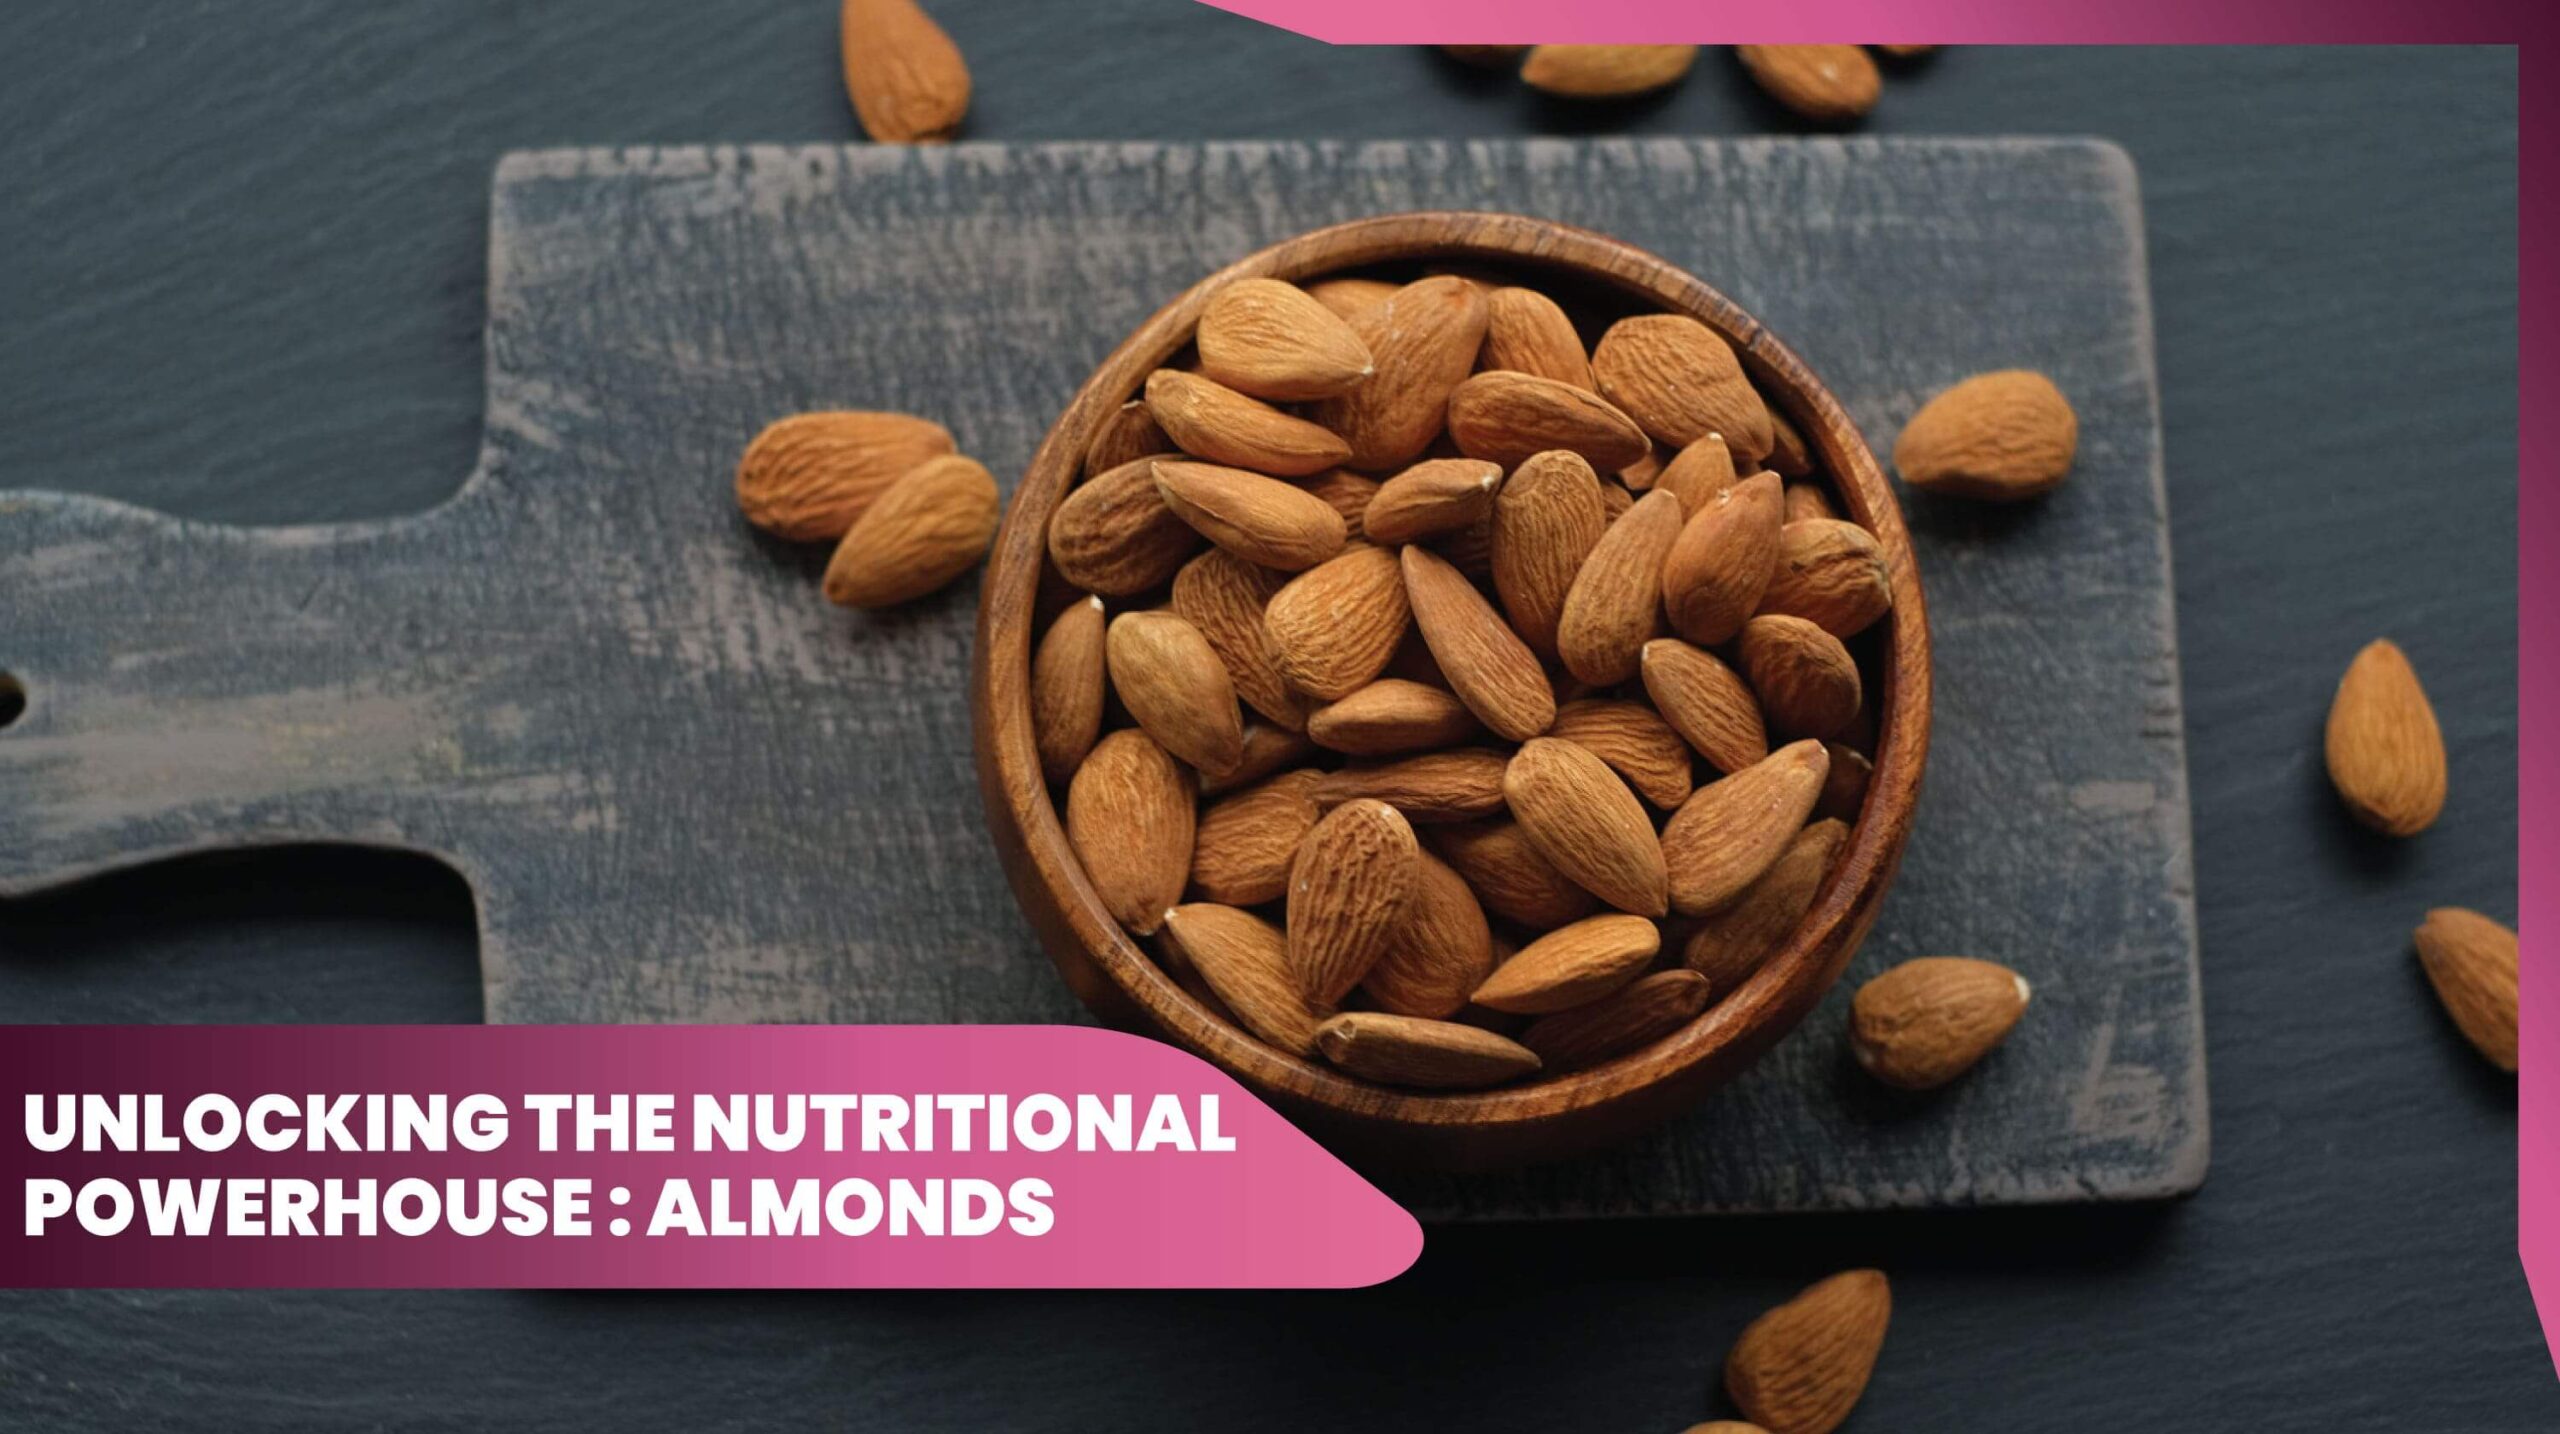 11unlocking the nutritional benefits of almonds with easy almond recipes